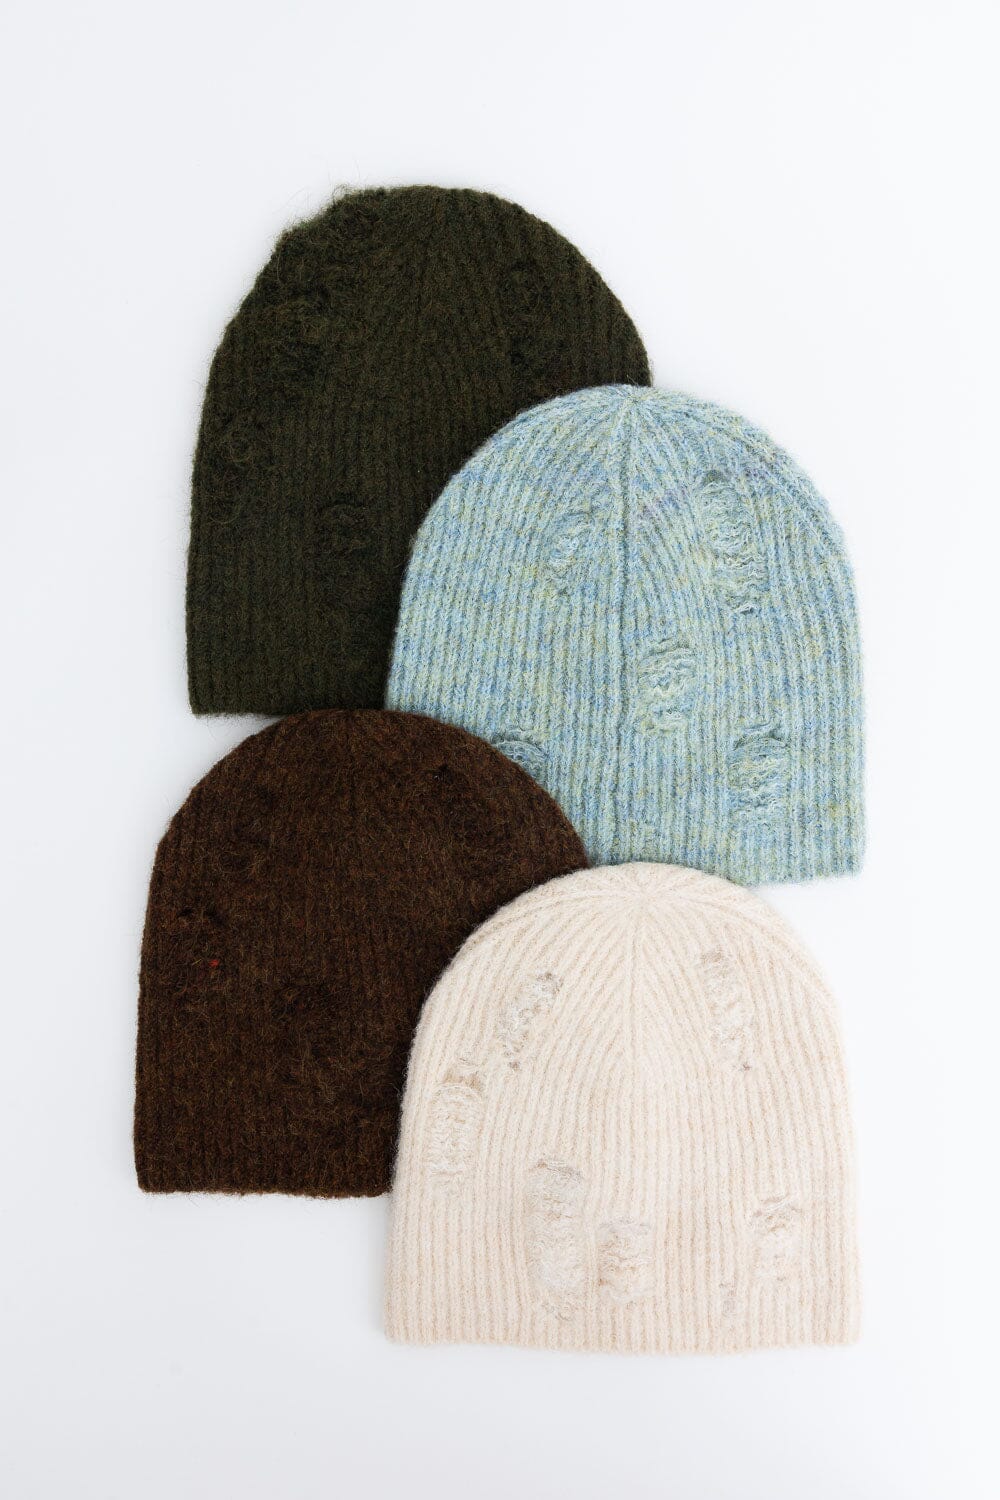 Rugged Edge Distressed Knit Beanie Beanies Leto Collection 